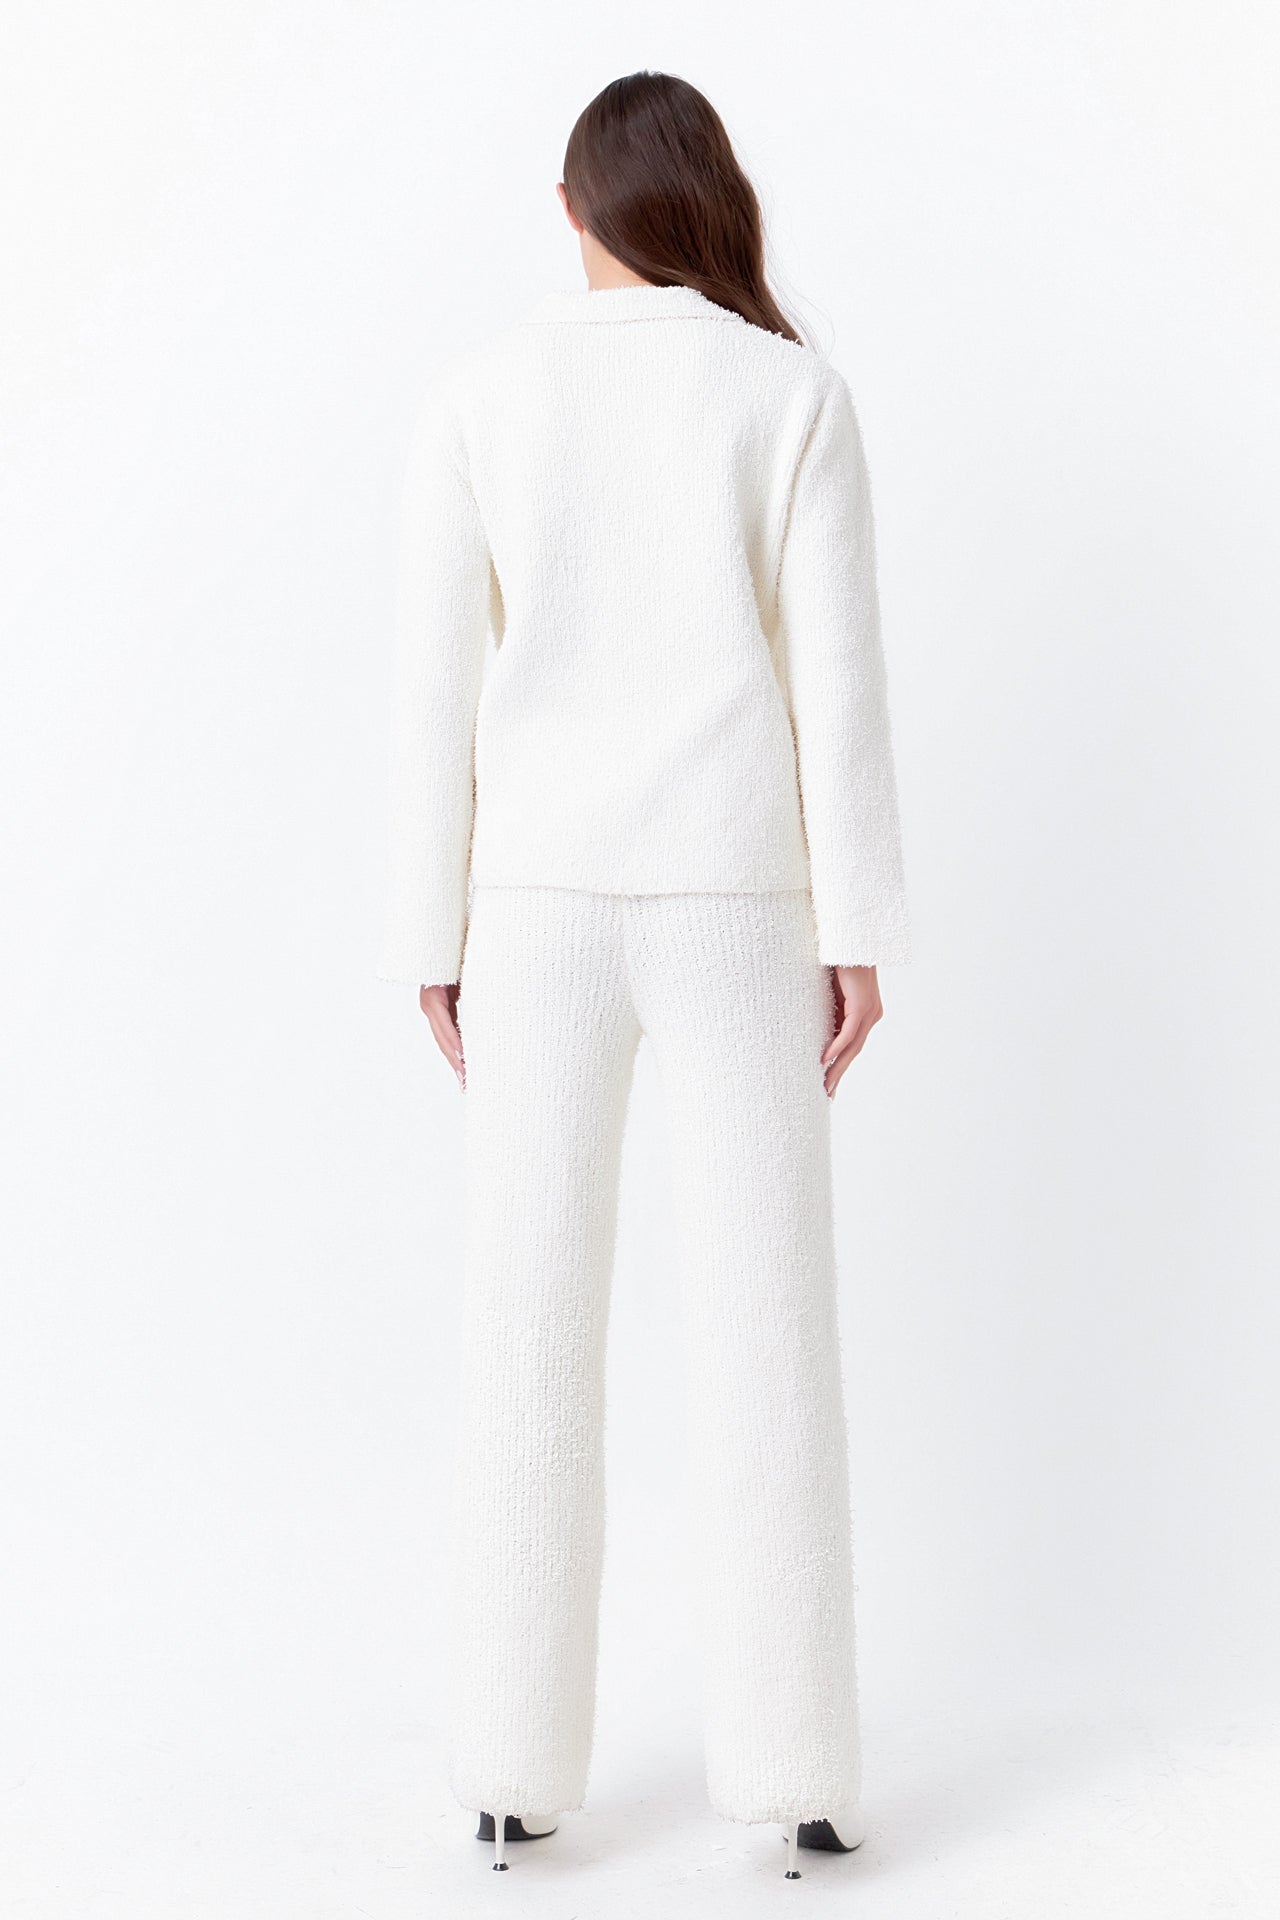 ENDLESS ROSE - Textured Fuzzy Collared Sweater - SWEATERS & KNITS available at Objectrare